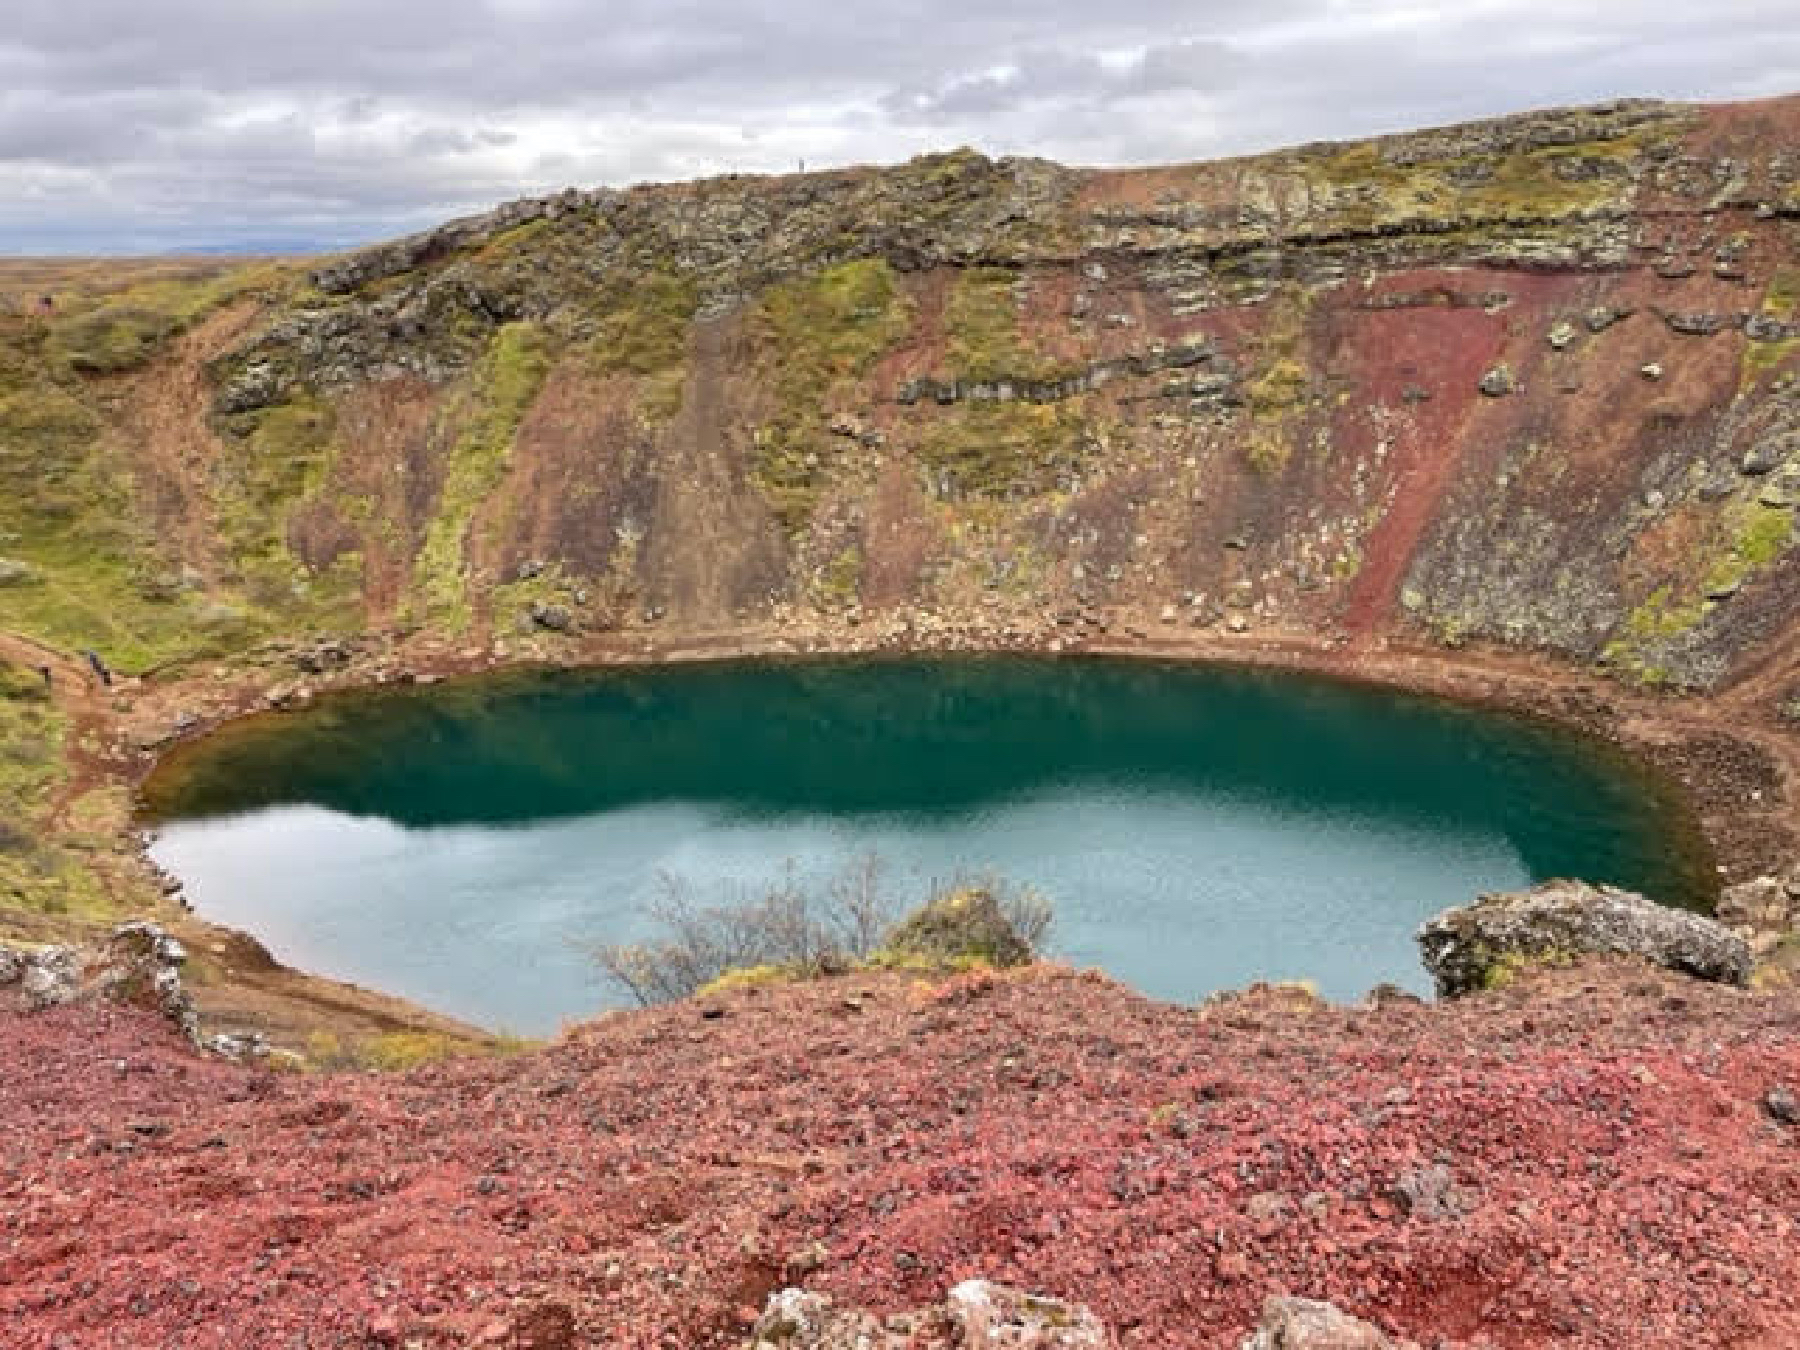 Rich rust and turquoise colors in Kerid Crater come from volcanic minerals in the soil there.